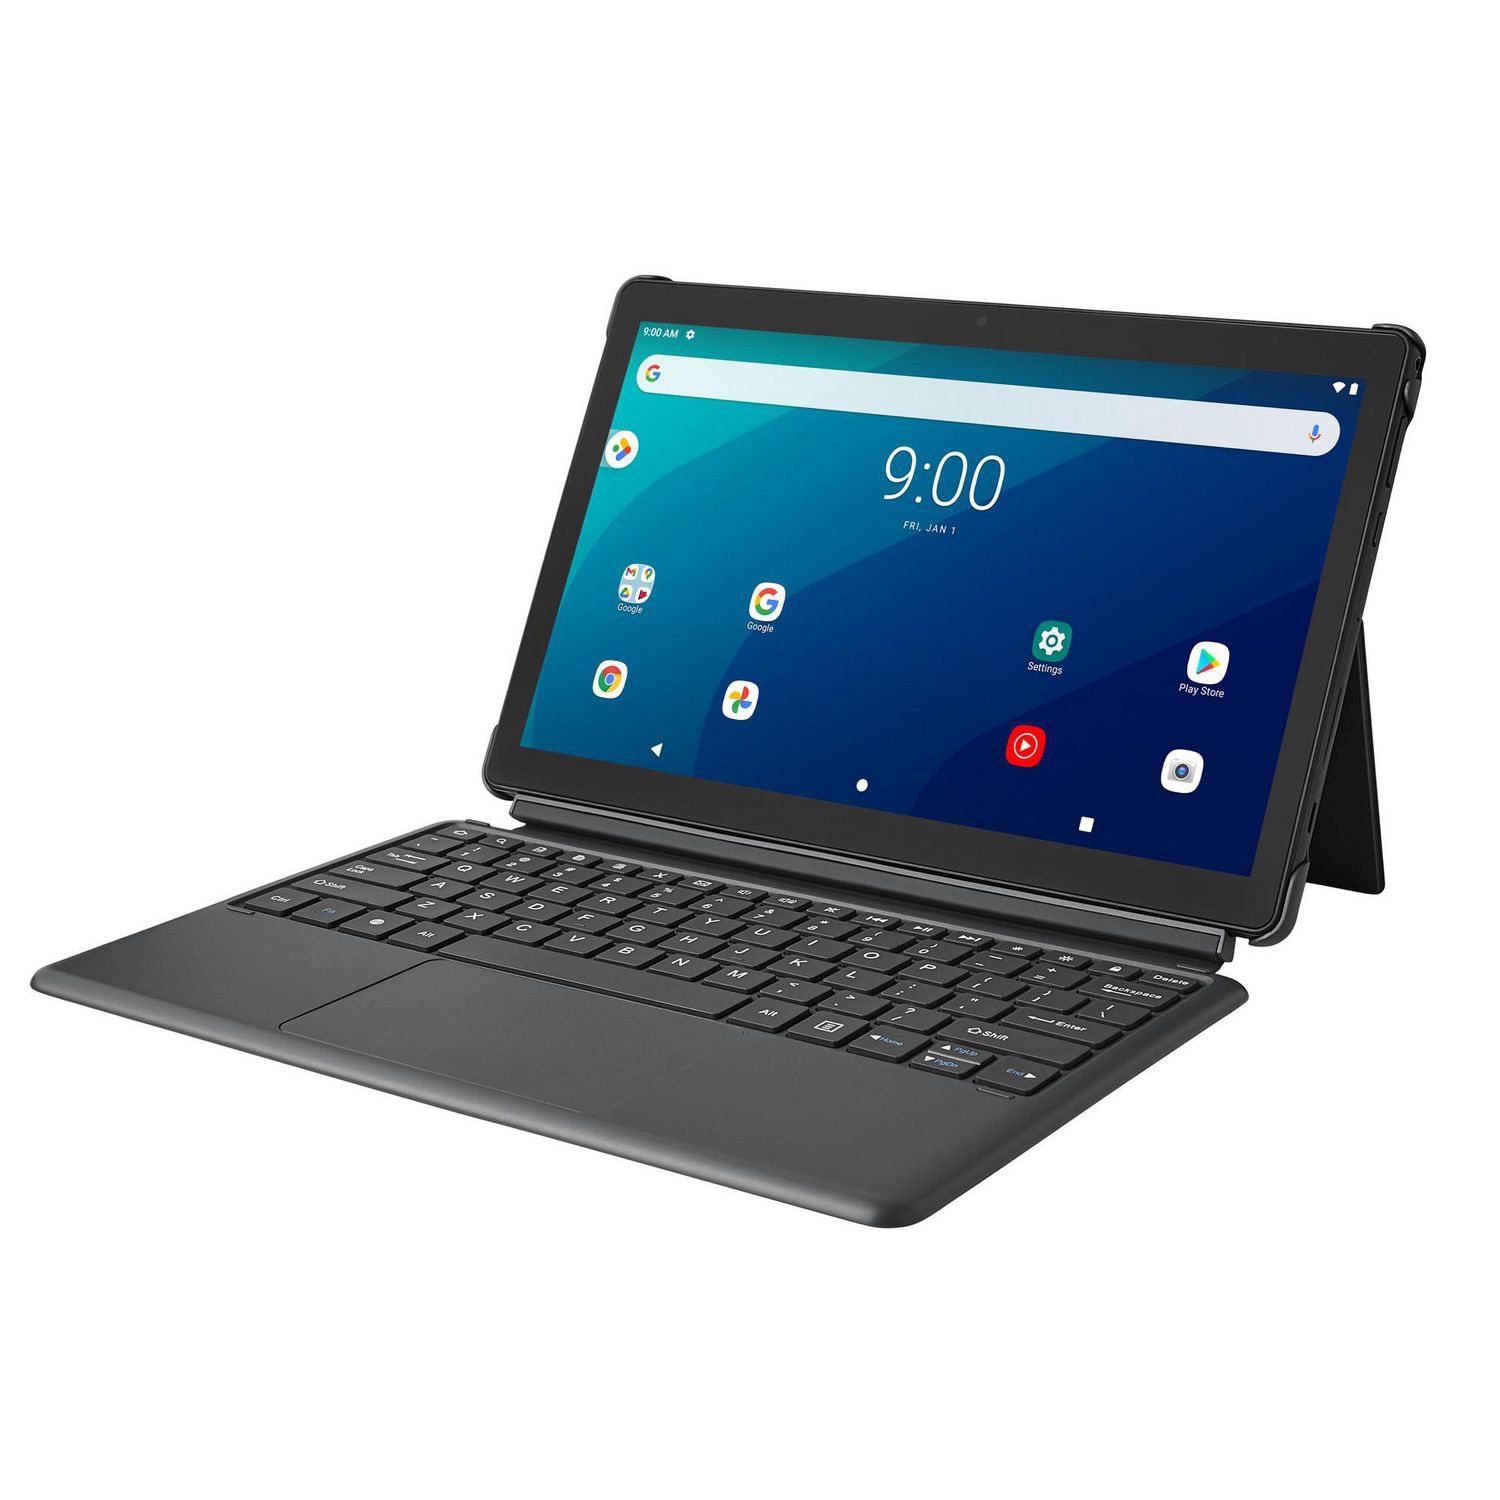 Refurbished (Excellent) - Onn 11.6-Inch 1920x1080 LCD Touchscreen 2.0 GHZ Octa-core processor Android Tablet Pro with Keyboard (Model 100043279 - Grey)